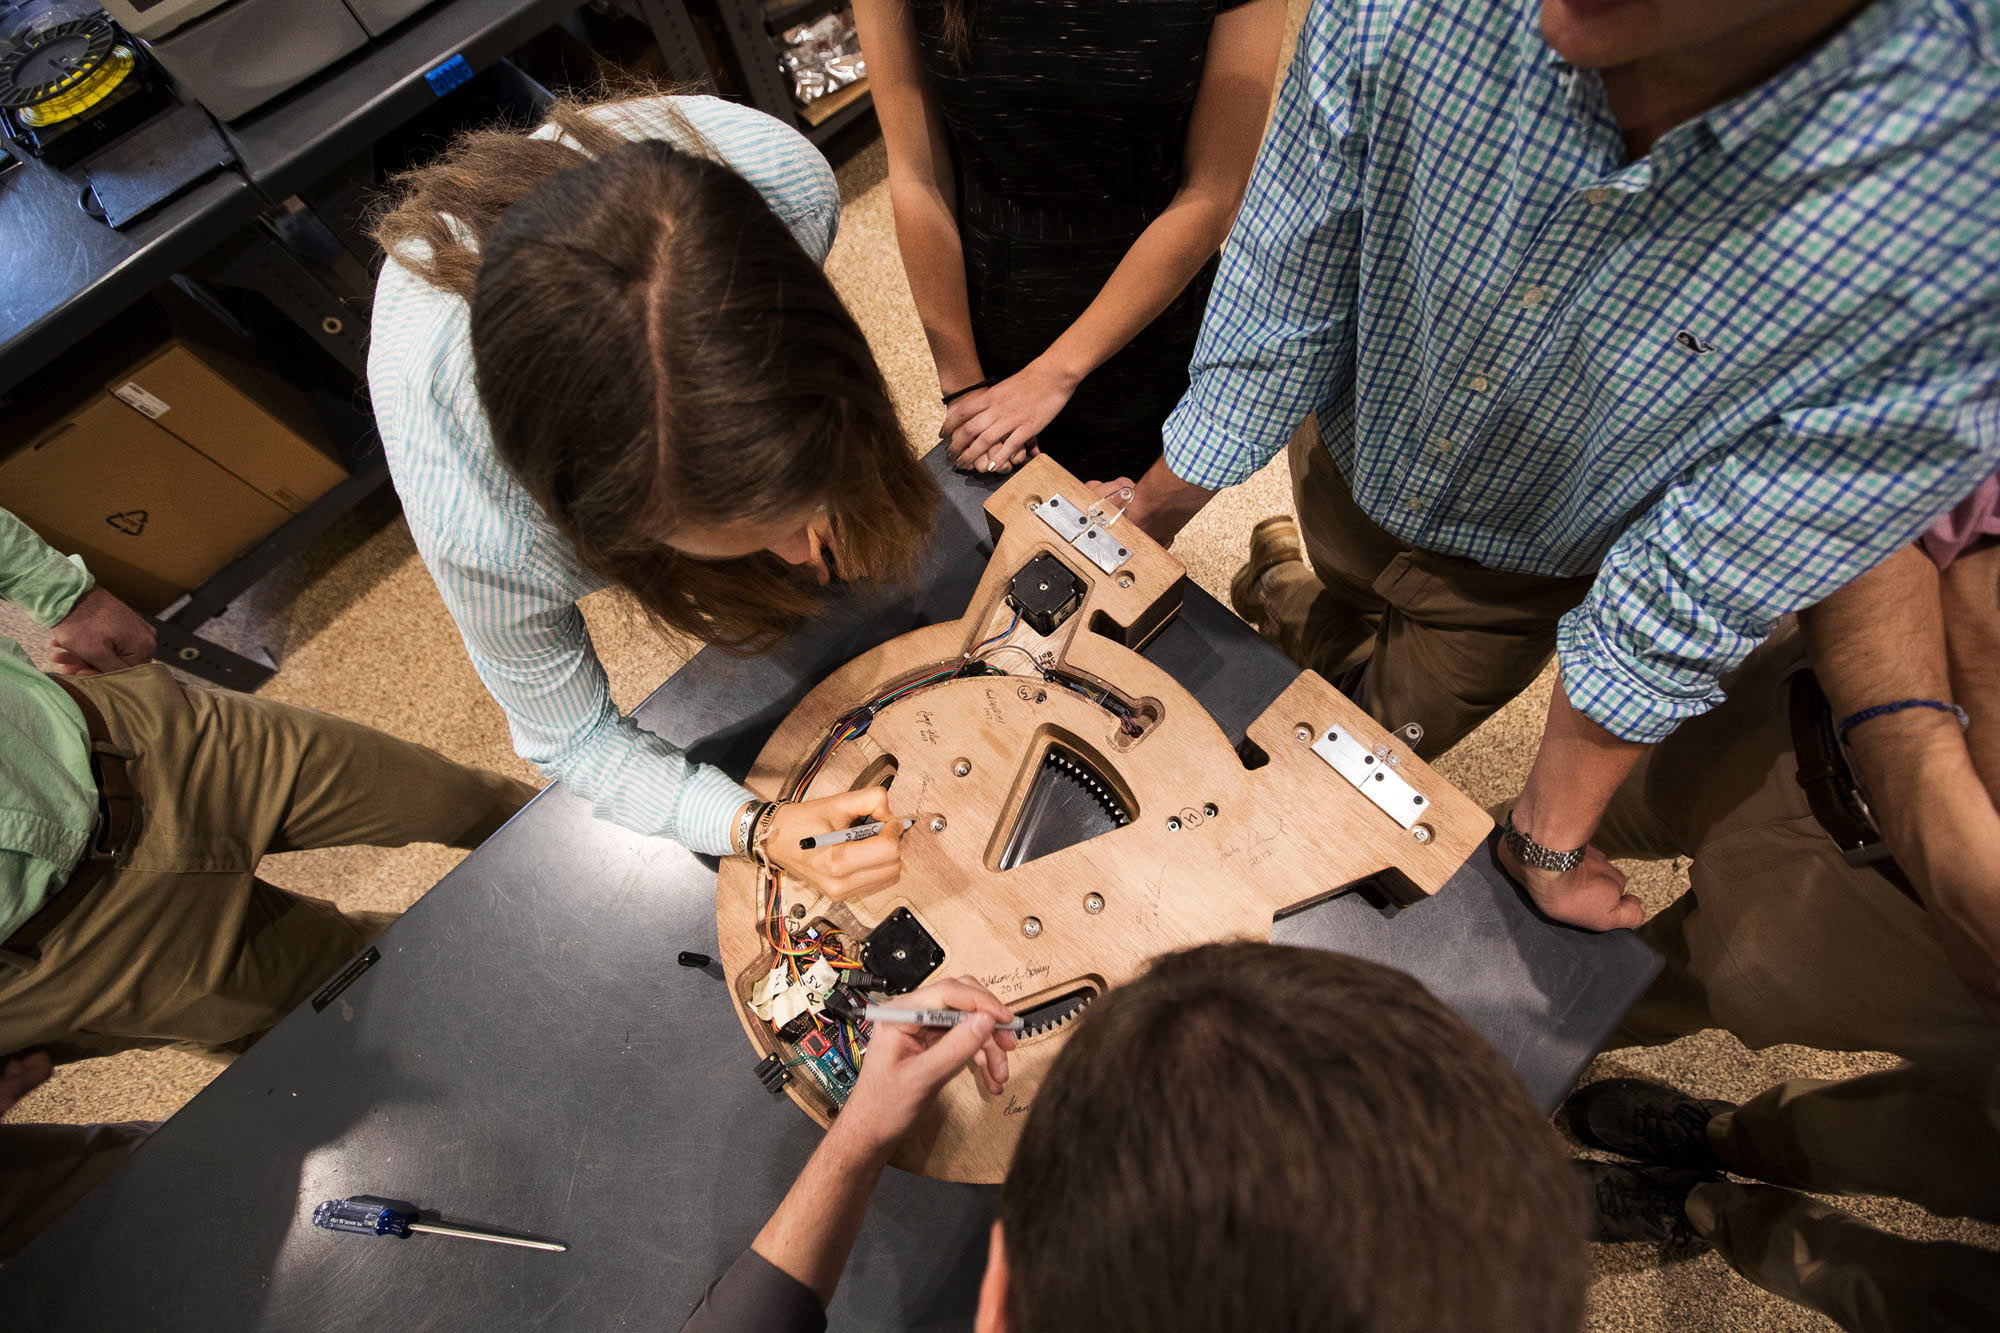 Students autographing the back of a clock